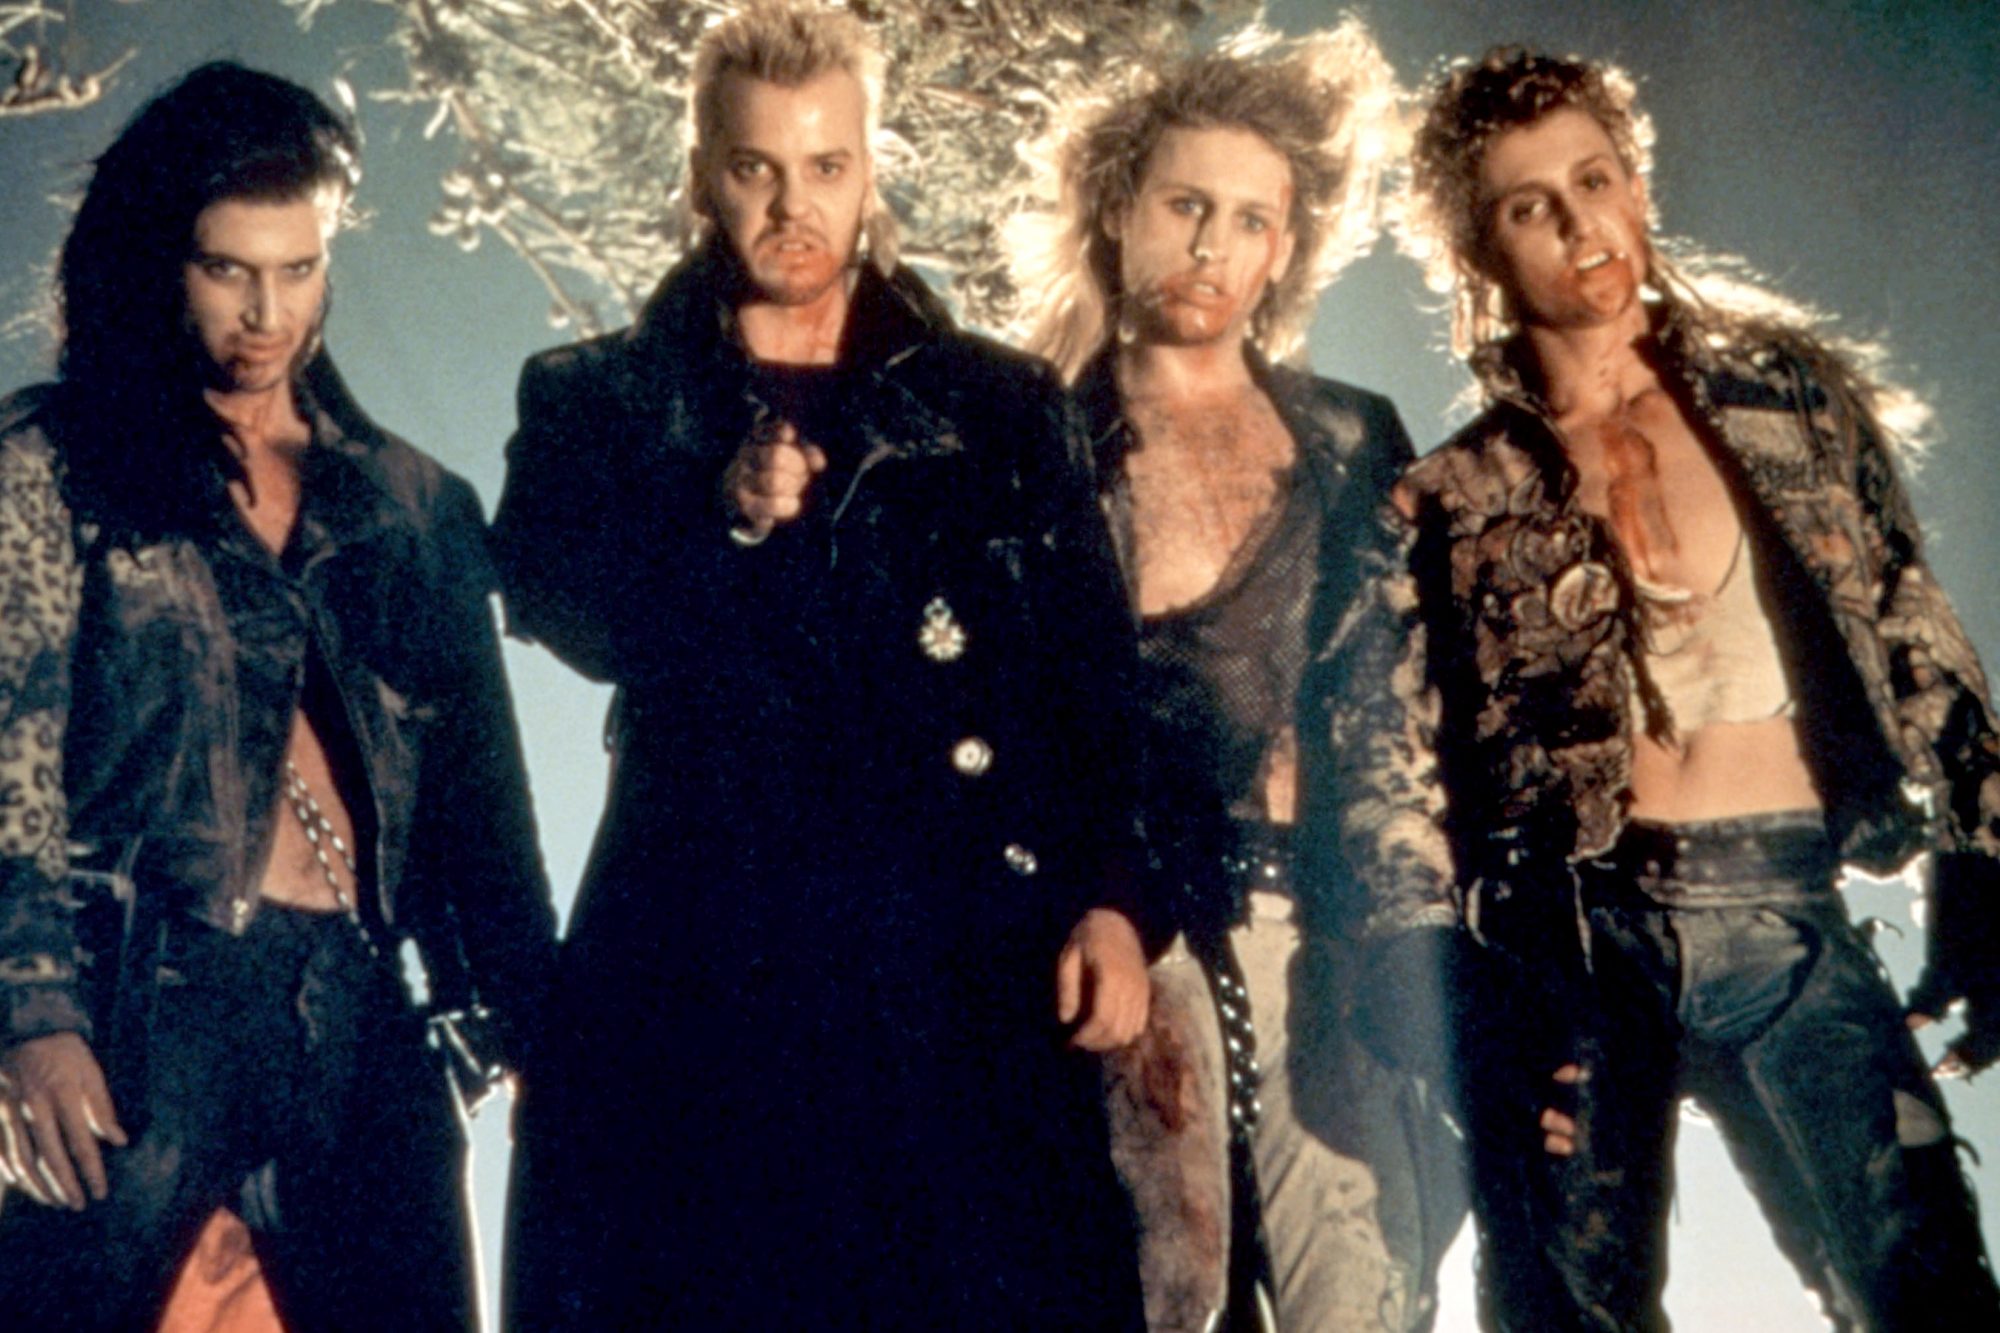 lost boys once upon a time